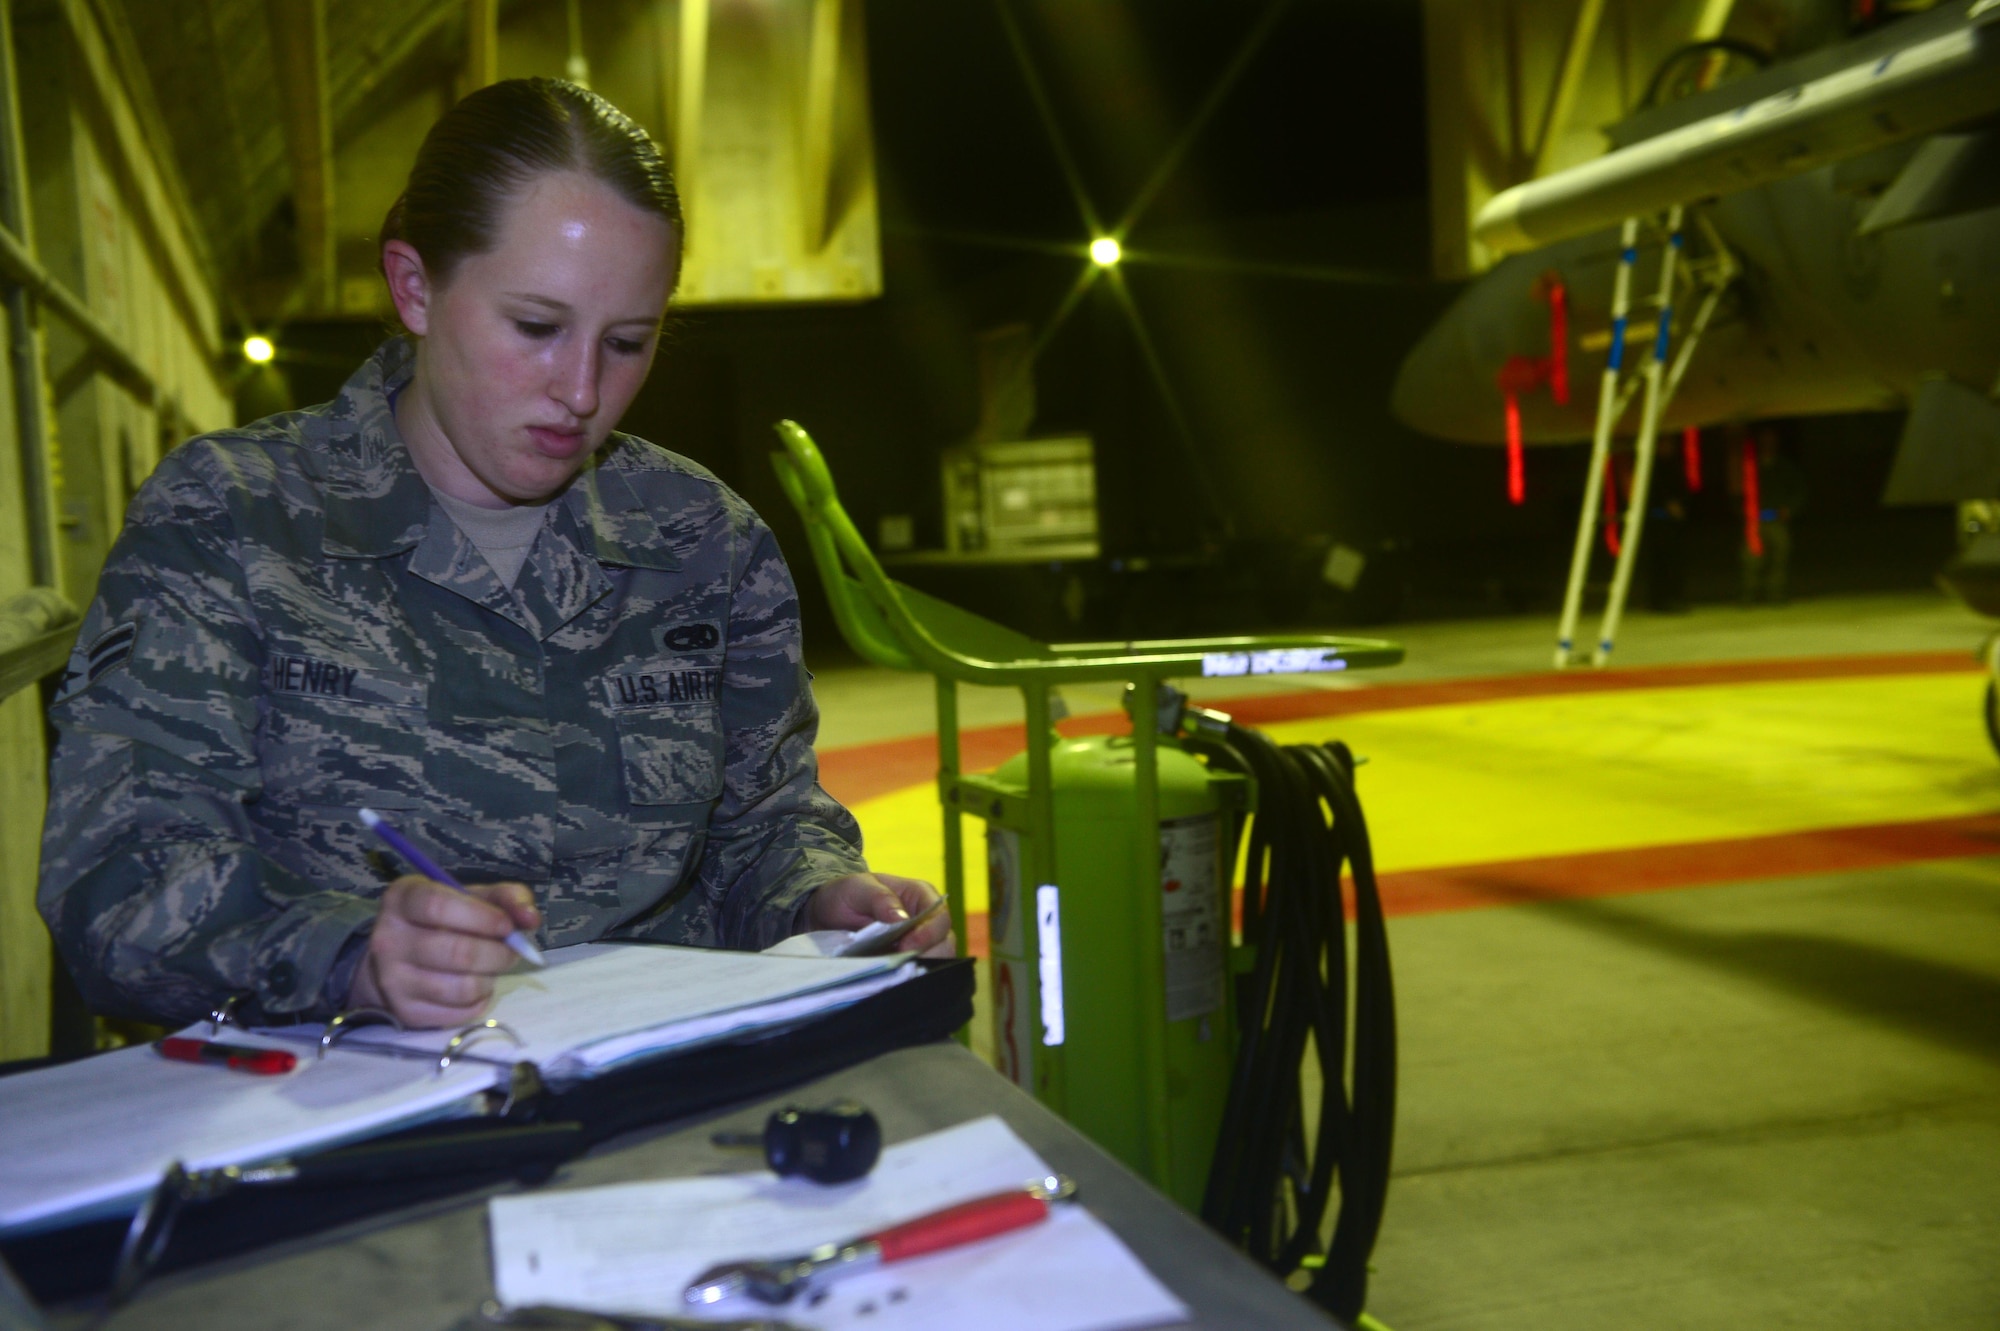 Airman 1st Class Katelyn Henry prepares forms for the next day's mission, during the Blue Flag exercise Nov. 24, 2013, at Uvda Air Force Base, Israel. Under abnormal conditions and in an unfamiliar location, maintainers from Royal Air Force Lakenheath had to use creative thinking and adaptability to meet mission requirements.  Henry is an aircraft armament systems apprentice with the 48th Aircraft Maintenance Squadron. (U.S. Air Force photo/Master Sgt. Lee Osberry)